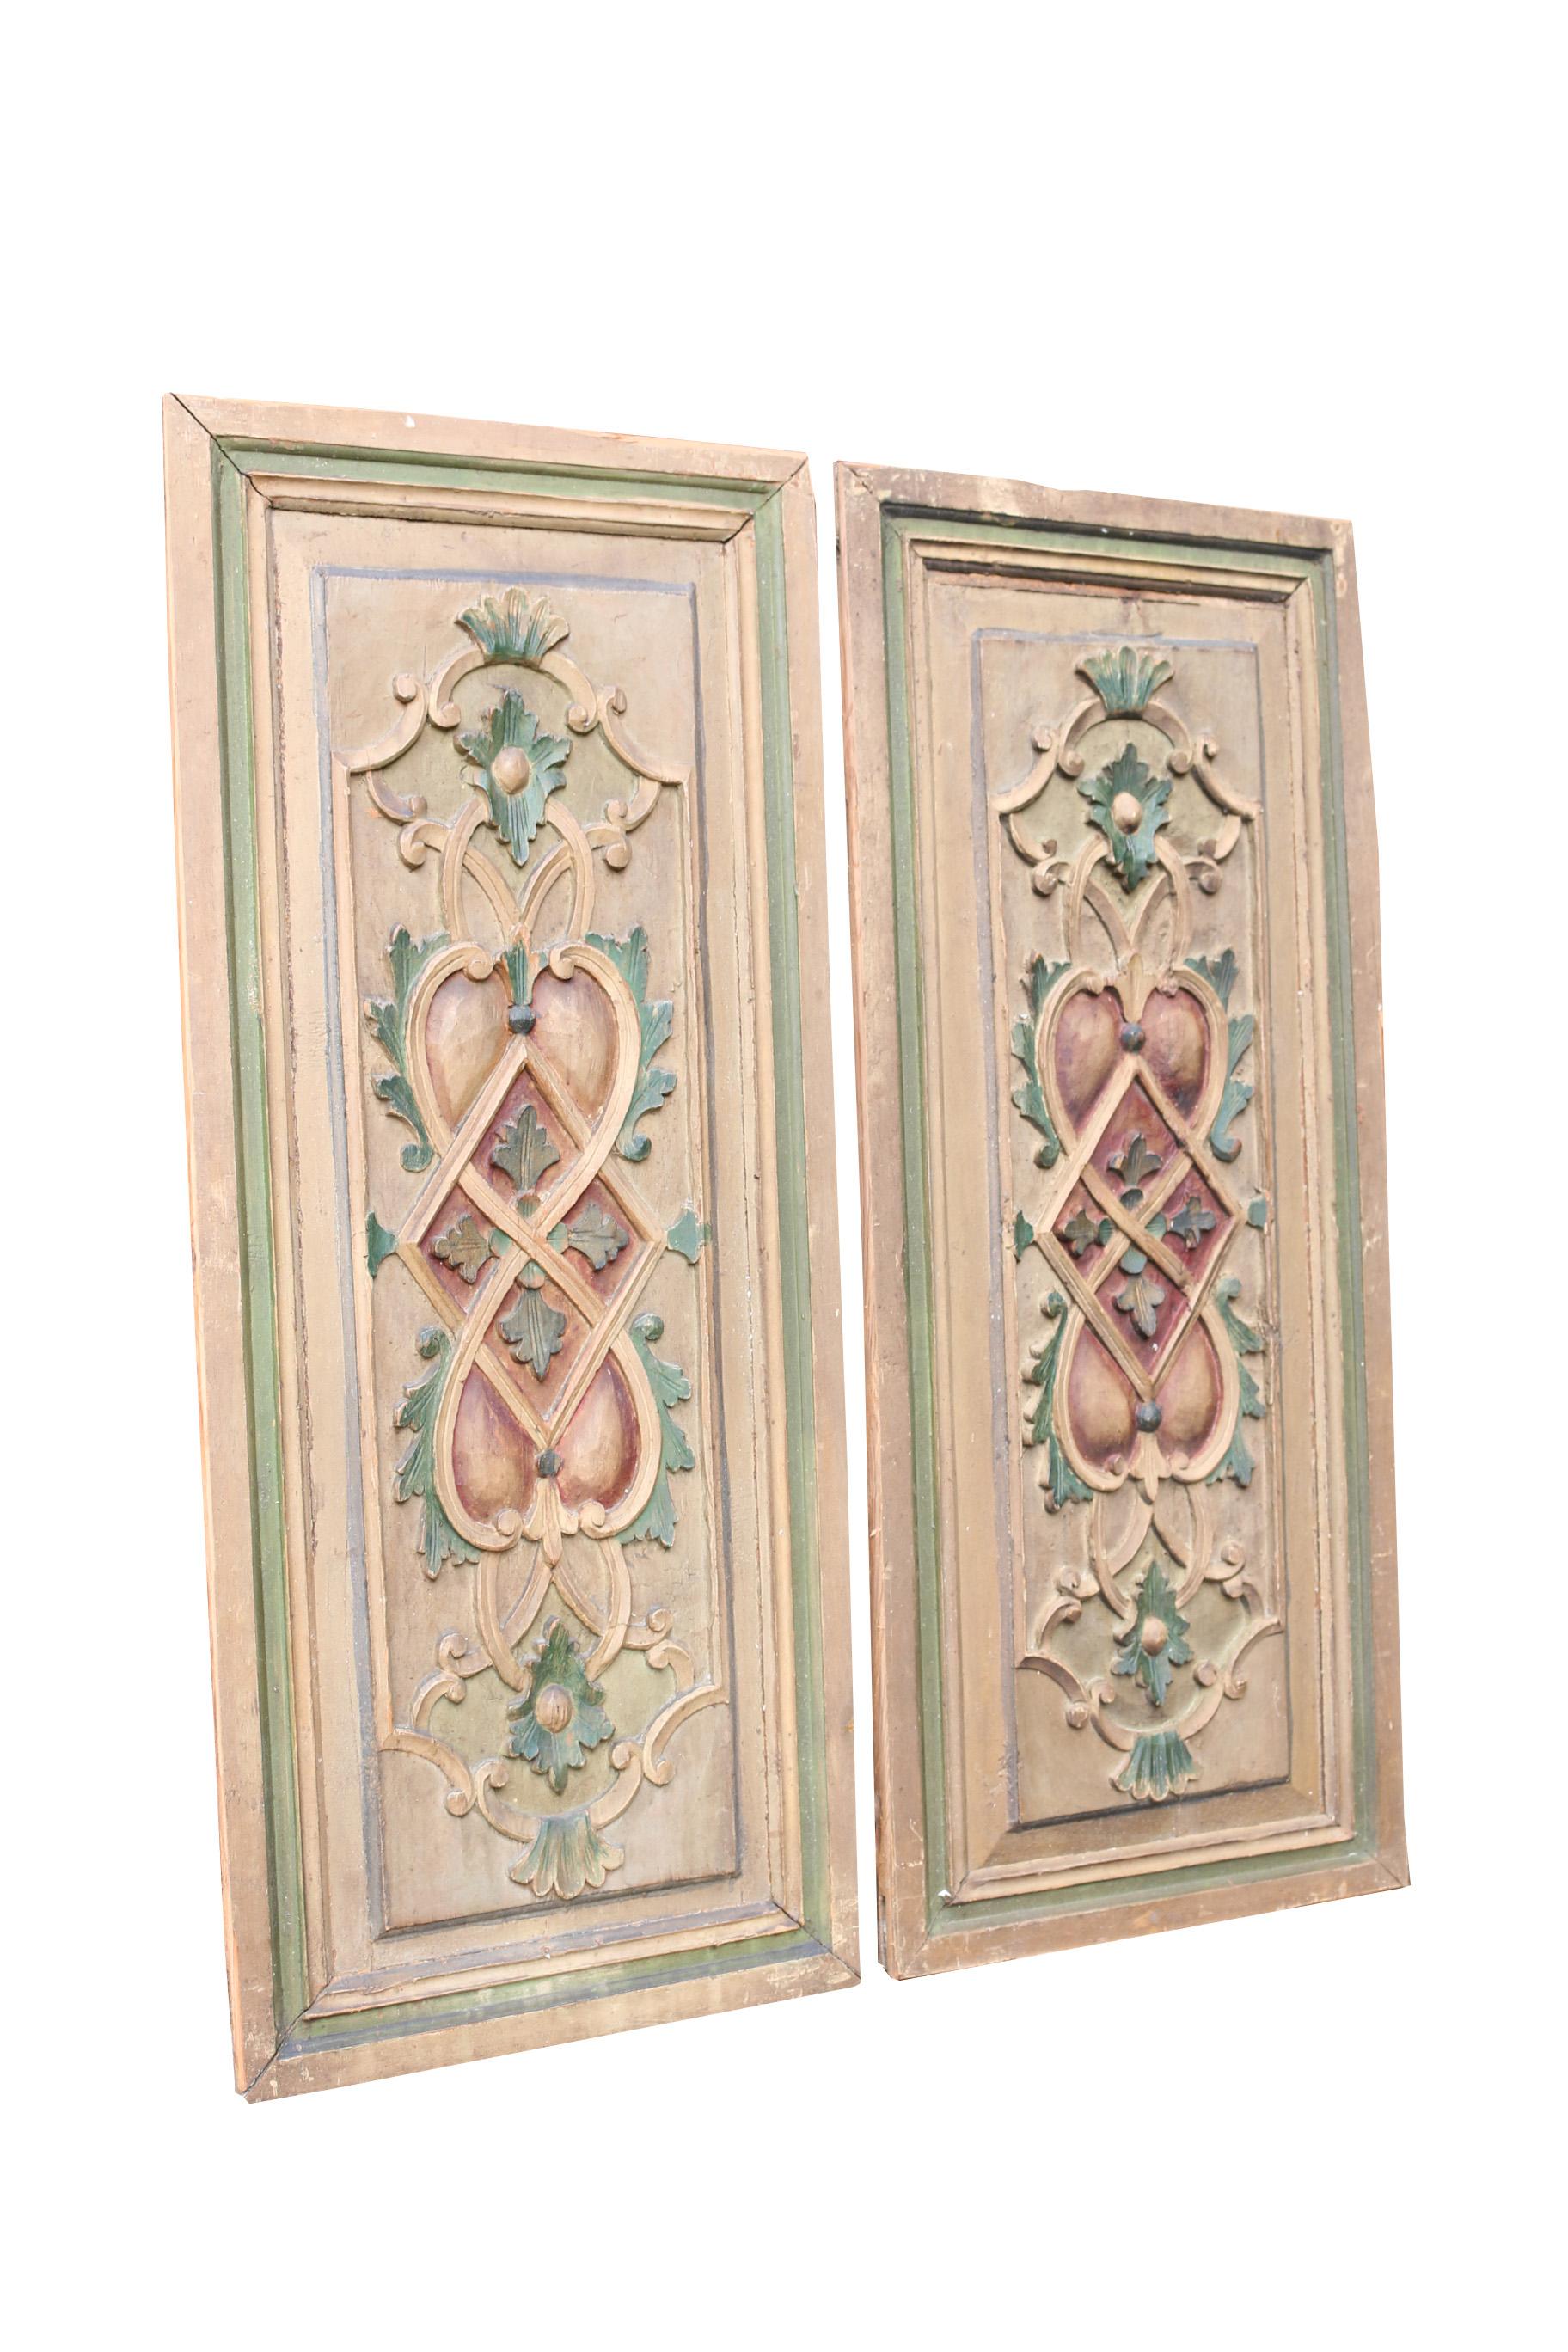 These hand carved panels feature original paint. Additional Dimensions: Width 43.5 cm & 44 cm Weight 4 kg each.